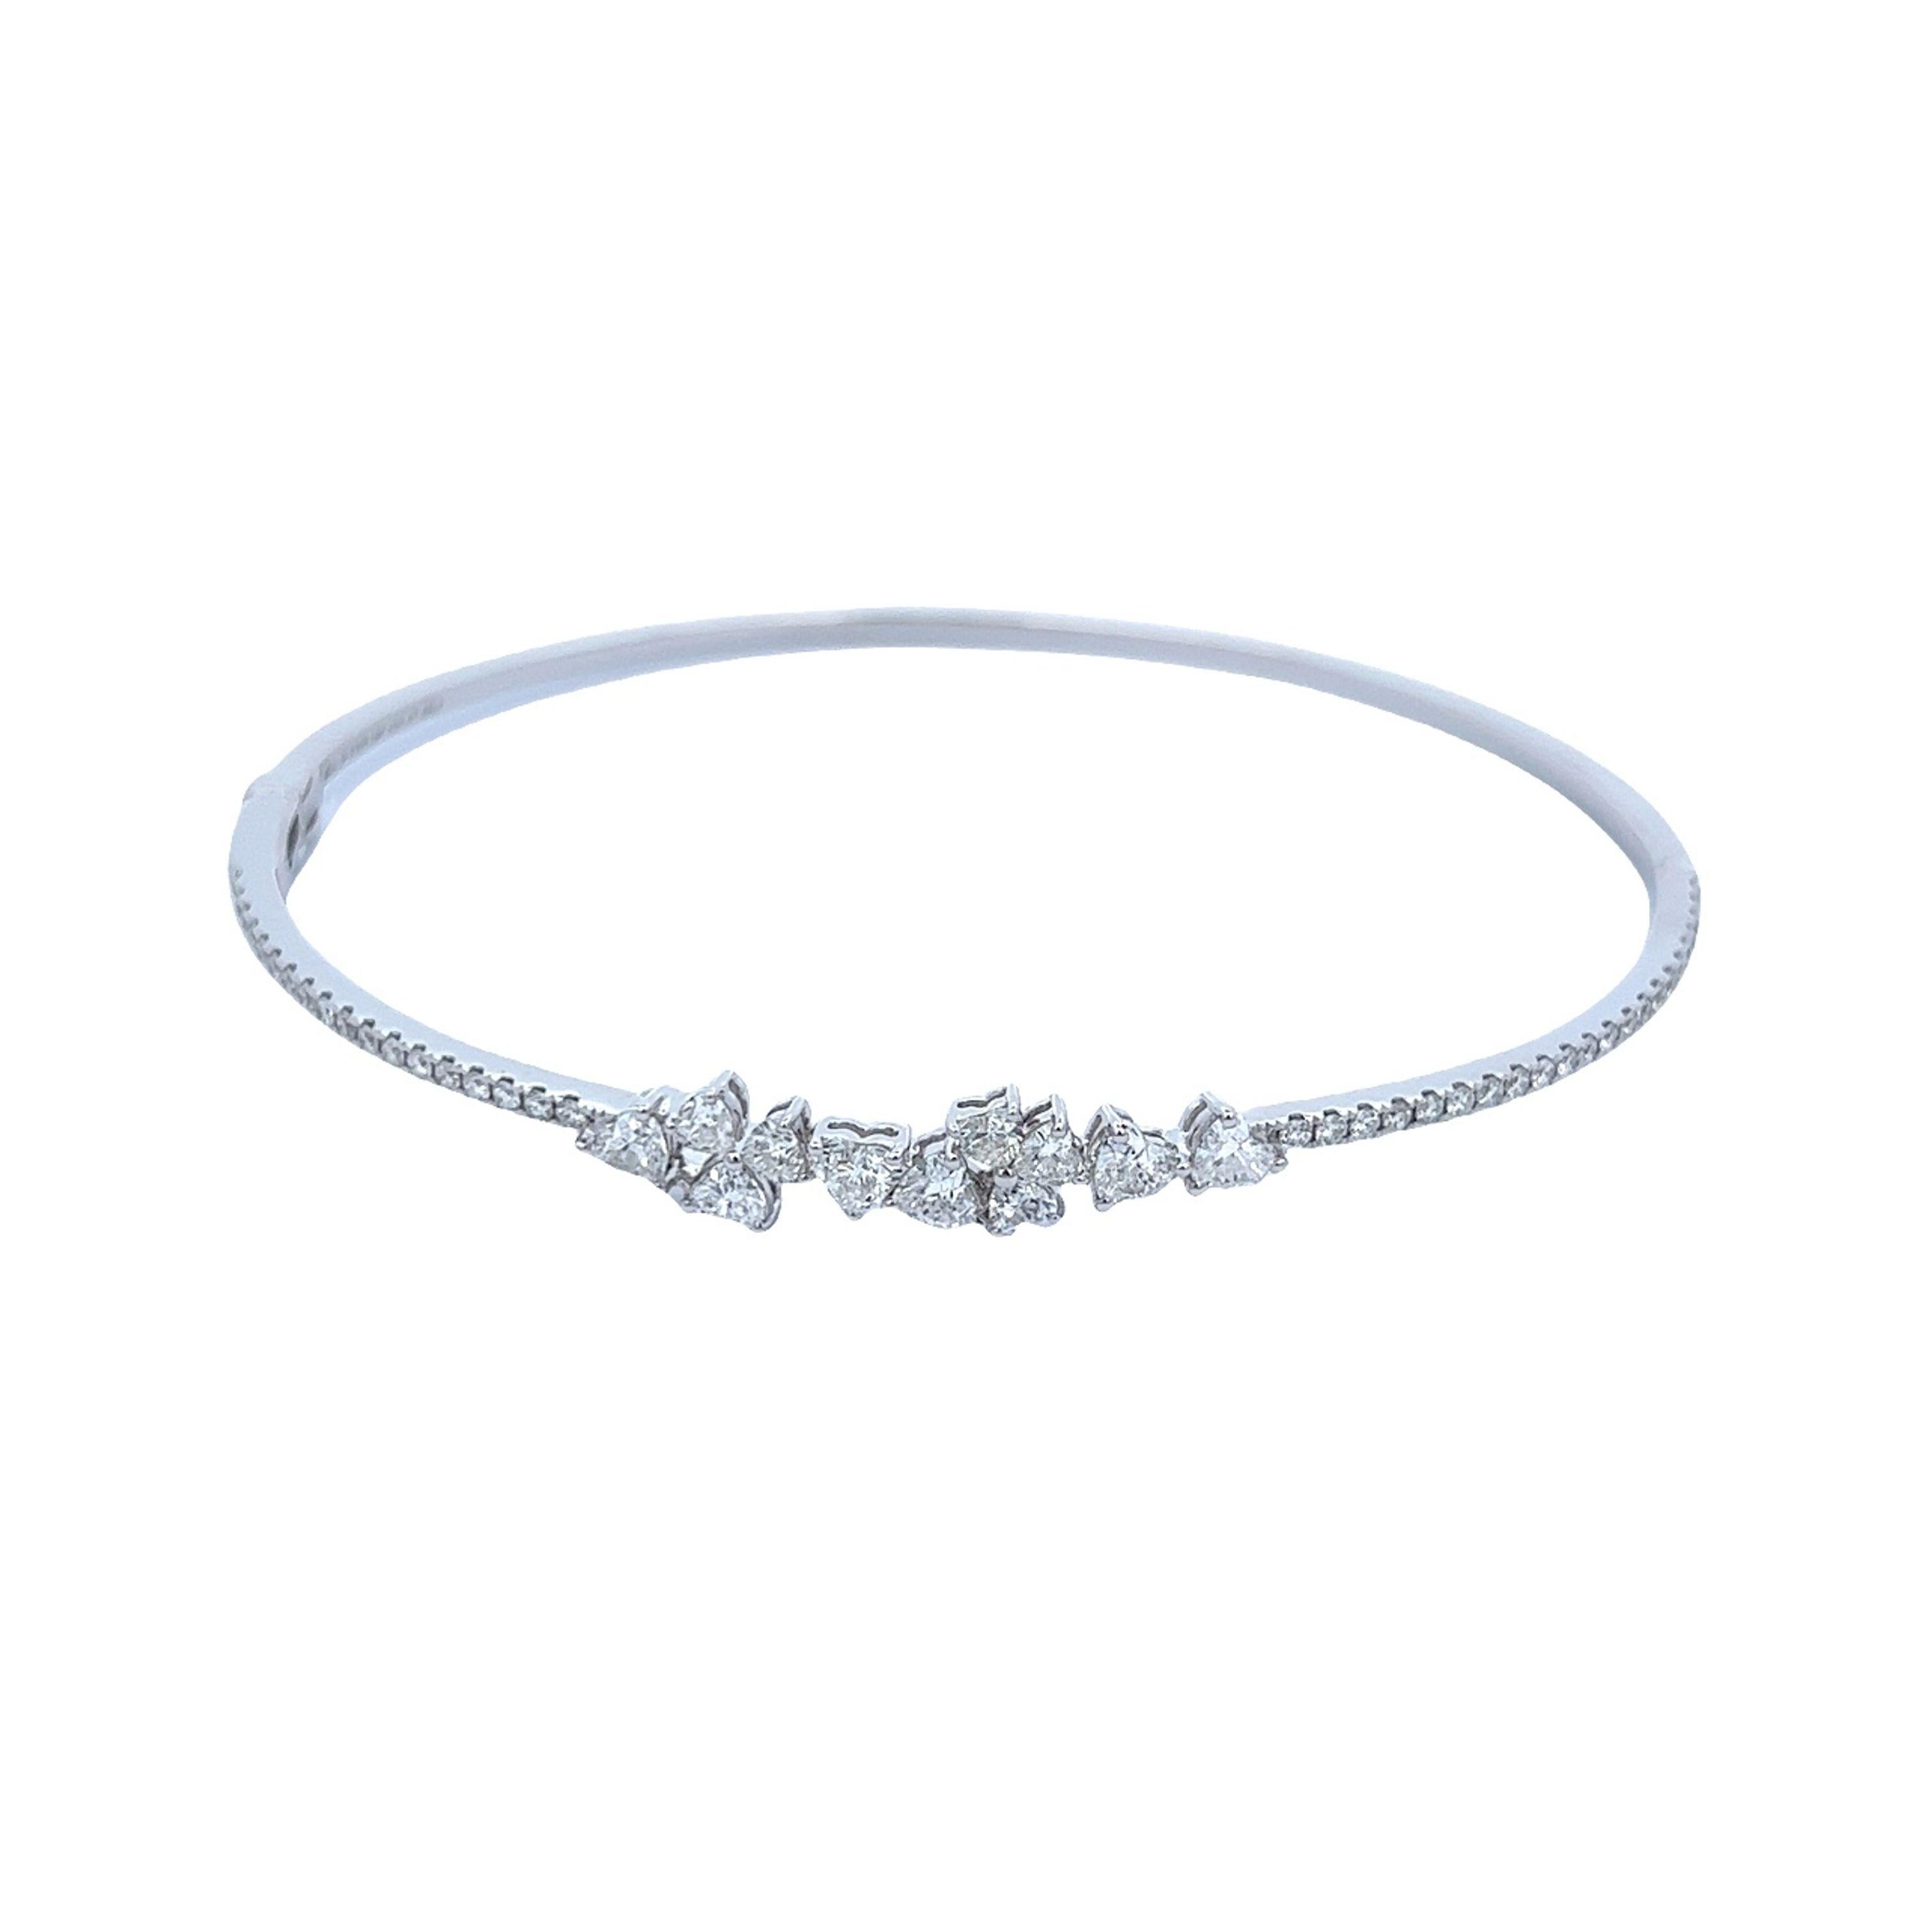 Exquisite modern diamond cluster bangle, by Alexander Beverly Hills.
1.27 carats total diamond weight. 
11 heart diamonds, 0.91 carats. Approximately D/F color VVS2-VS1 clarity. 40 round diamonds, 0.36 carats. Approximately E/F color and VS clarity.